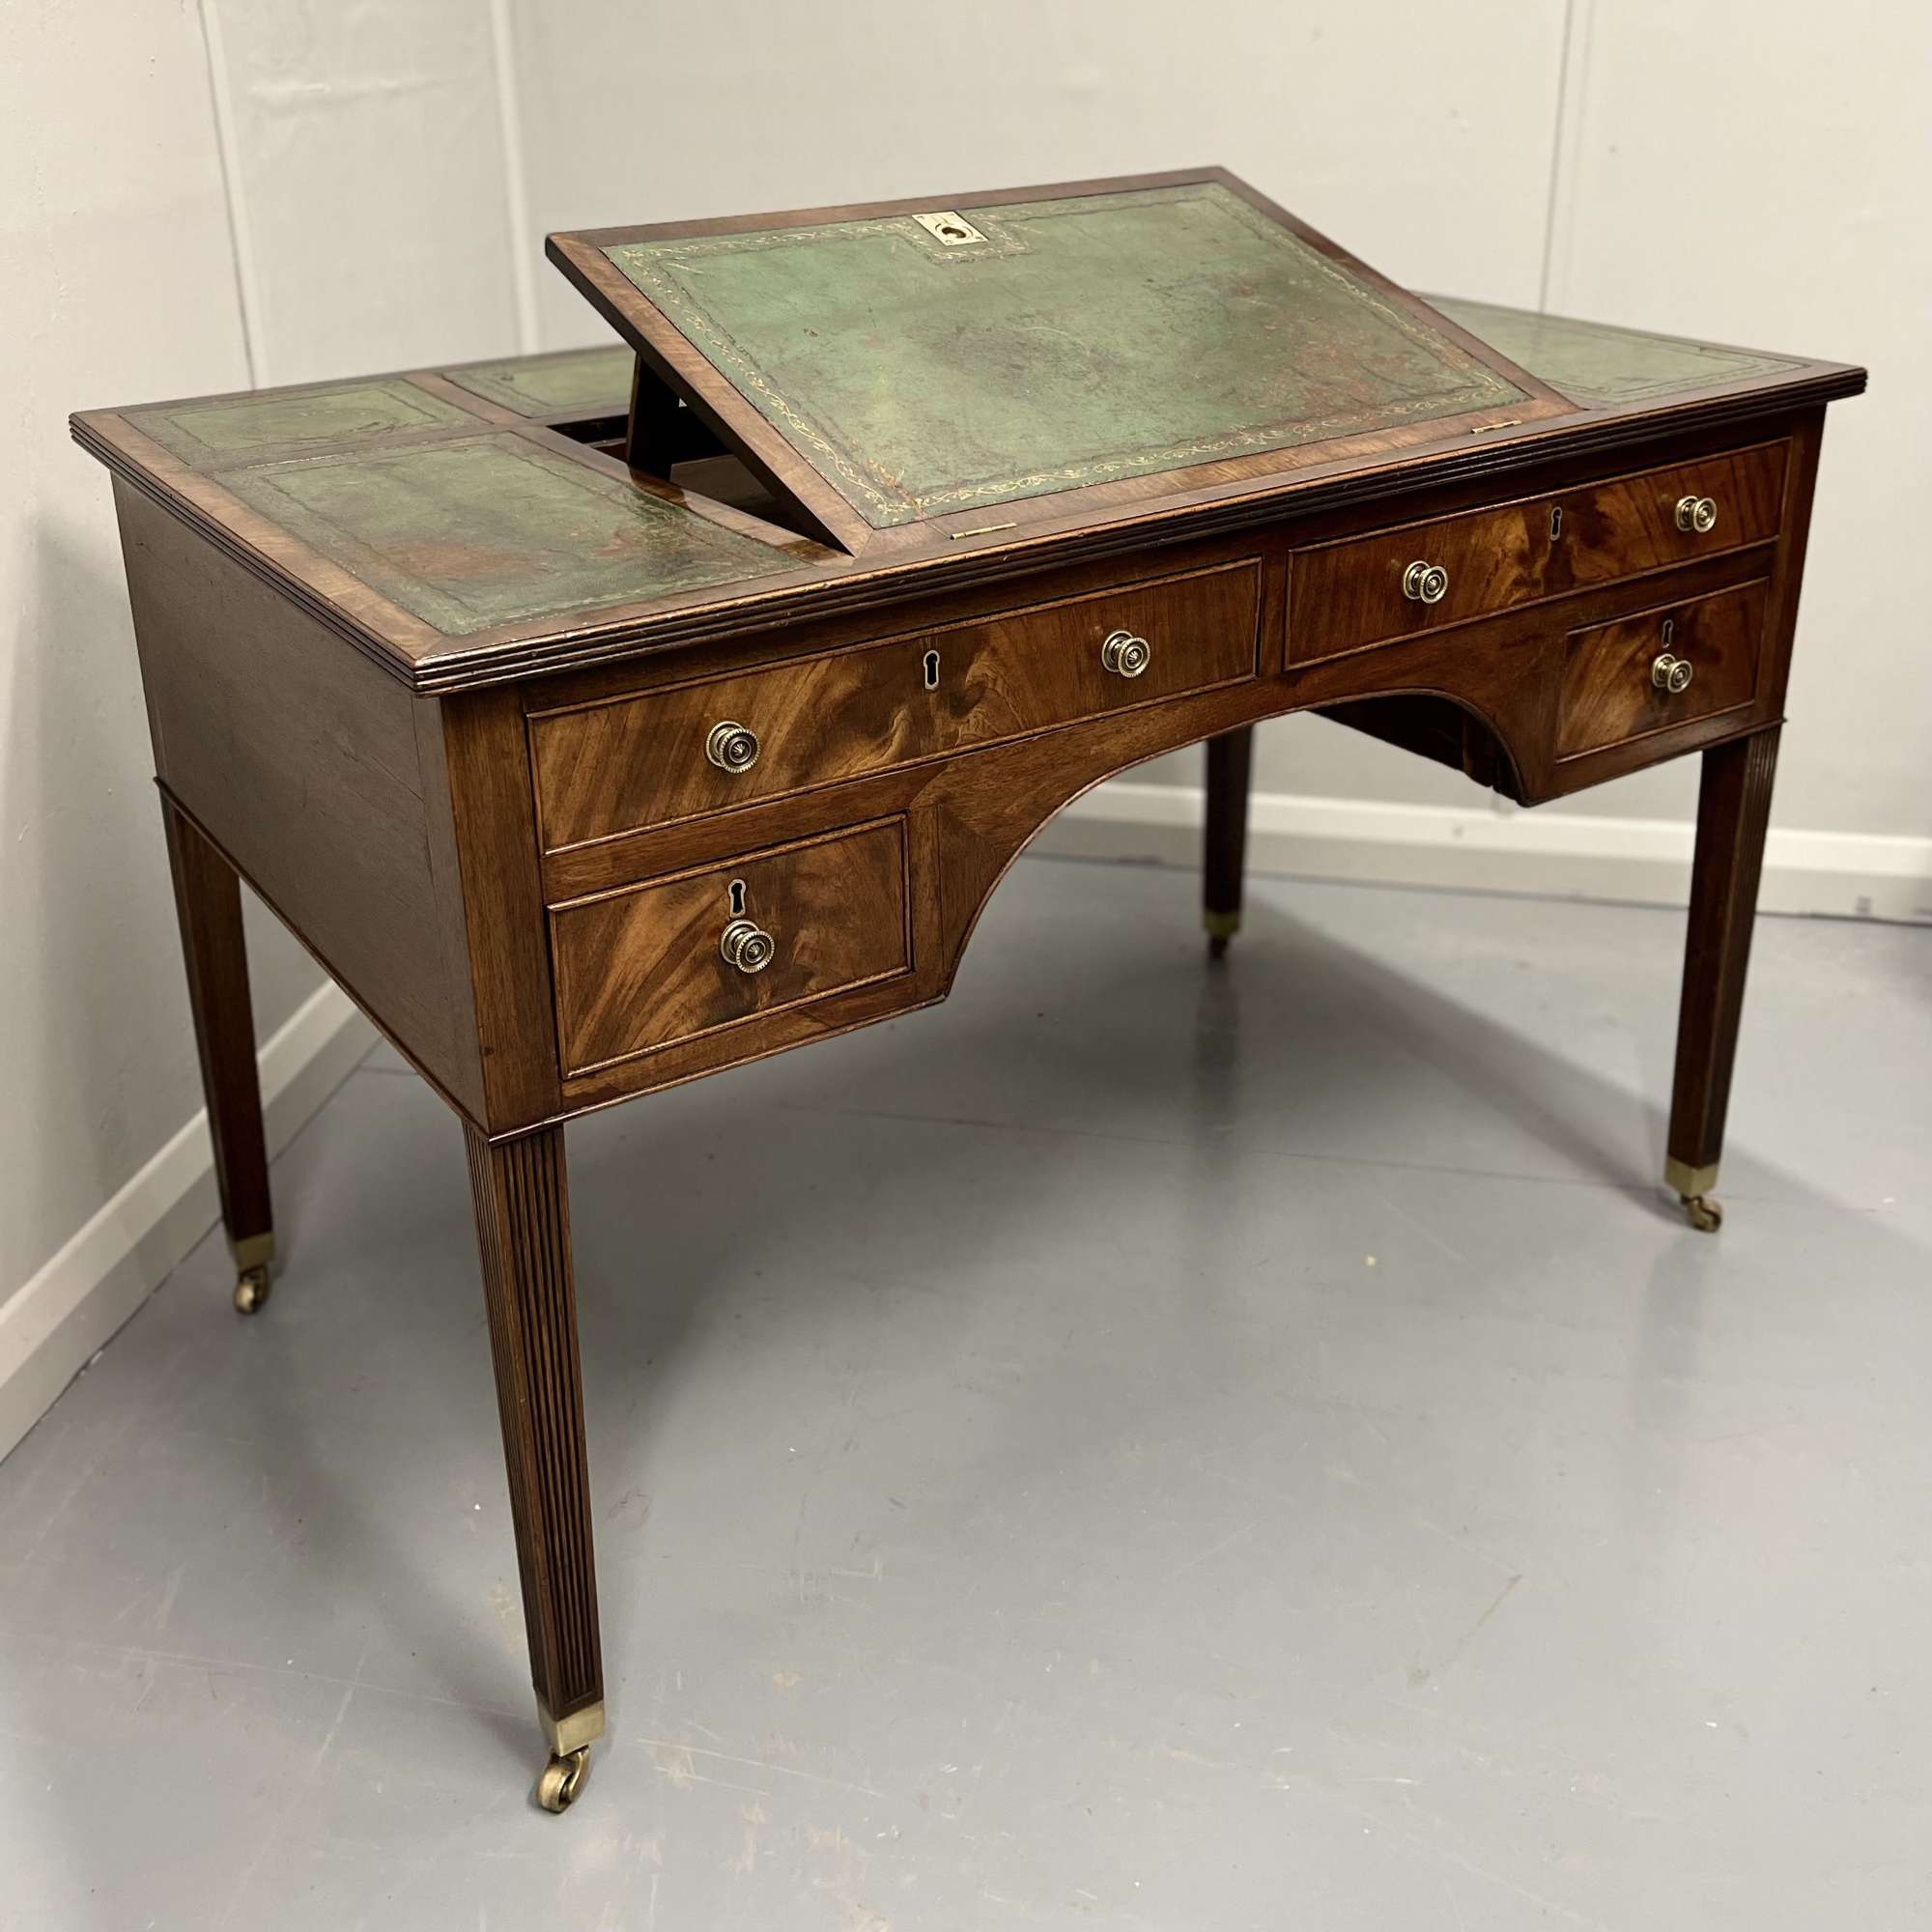 C19th partners desk with writing slope